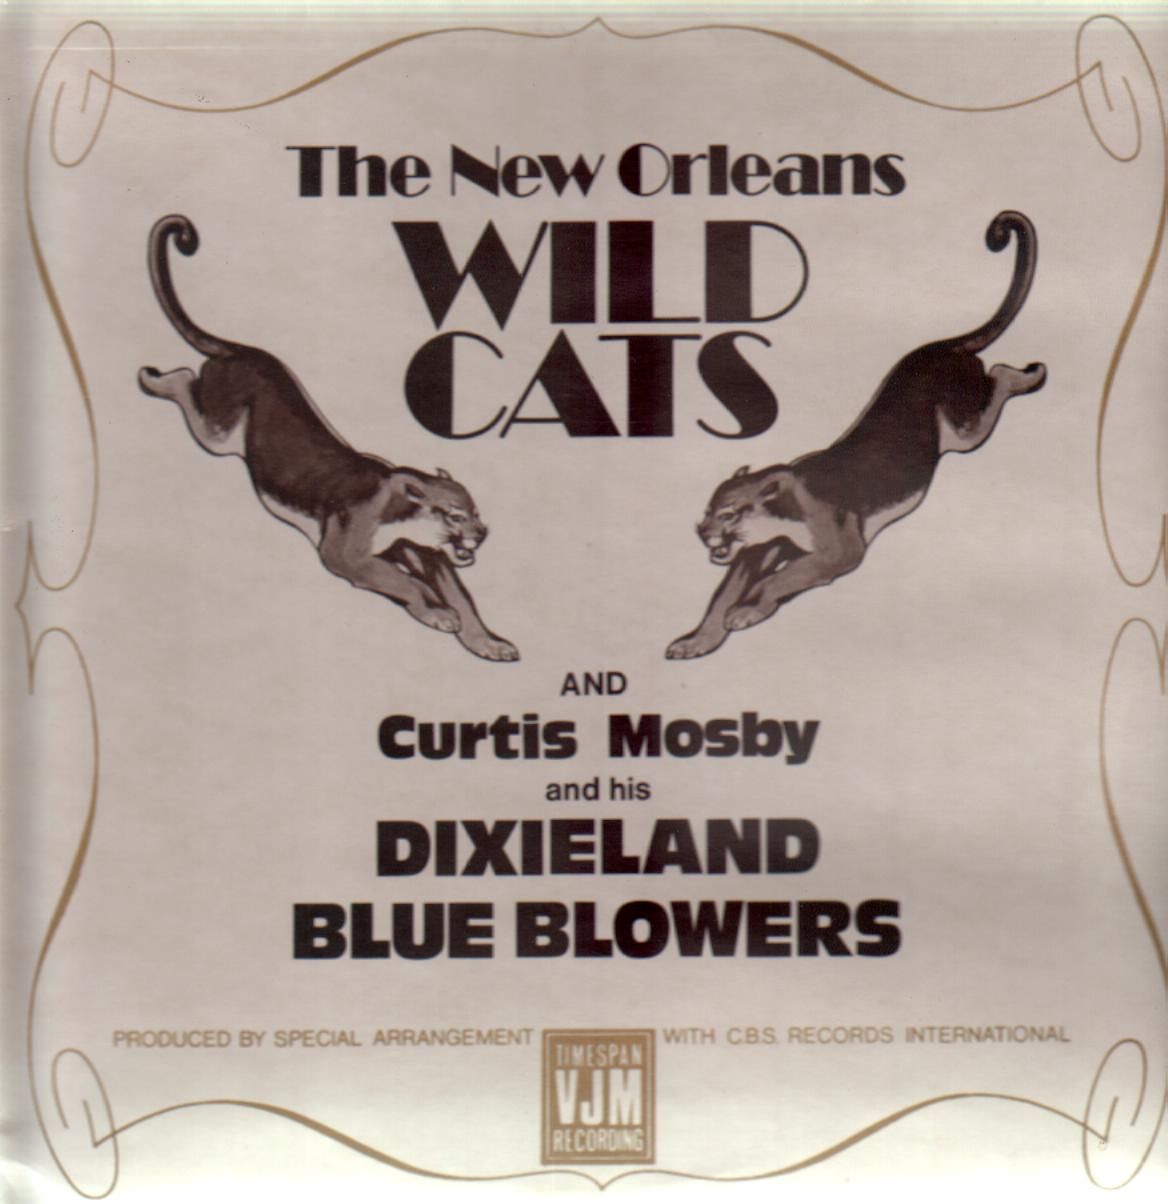 CURTIS MOSBY - The New Orleans Wild Cats cover 